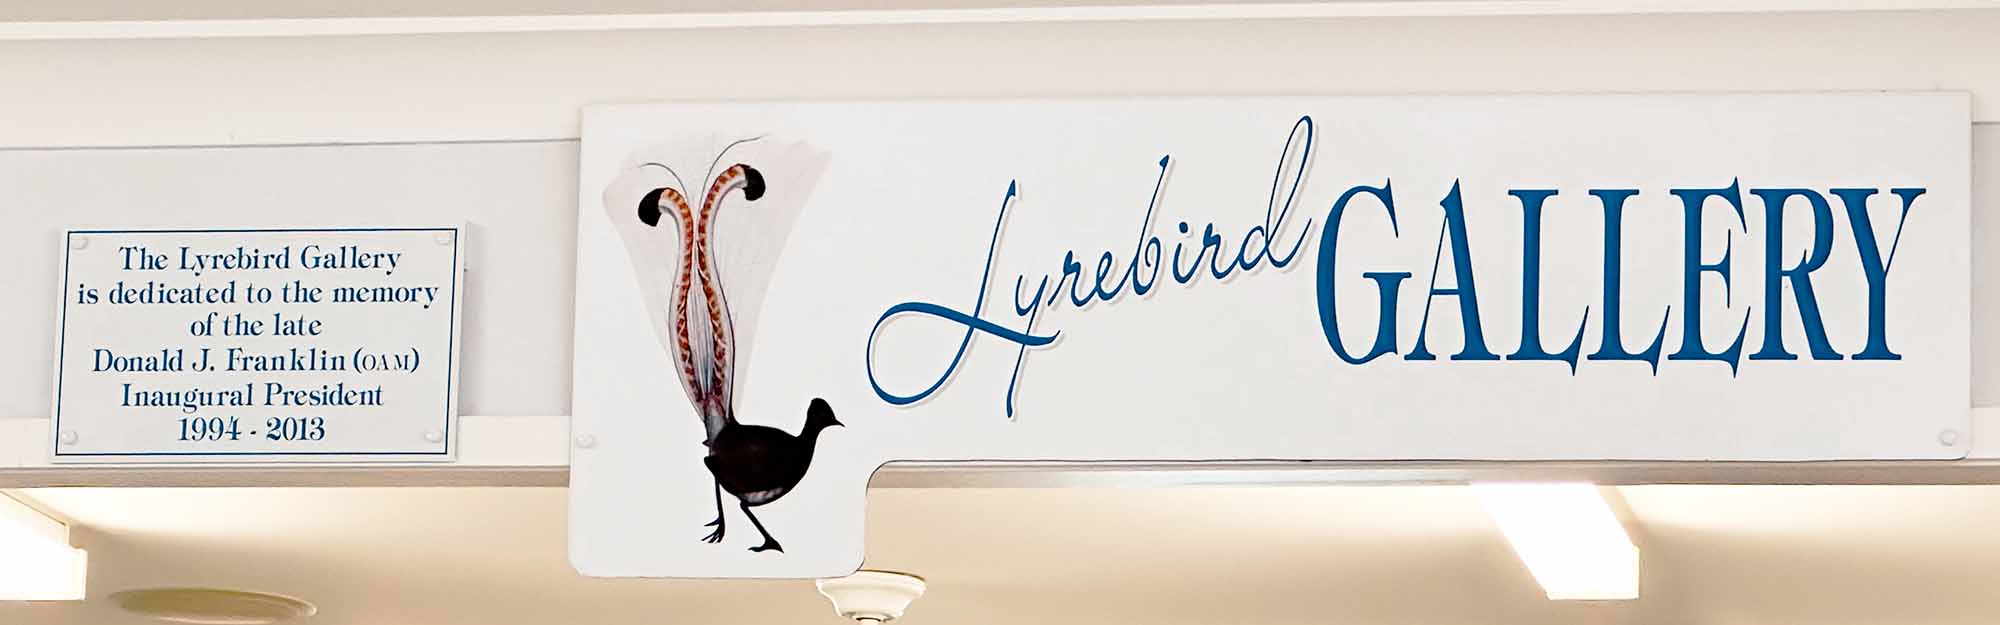 The Lyrebird Gallery internal signage showing dedication to the late Donald J Franklin